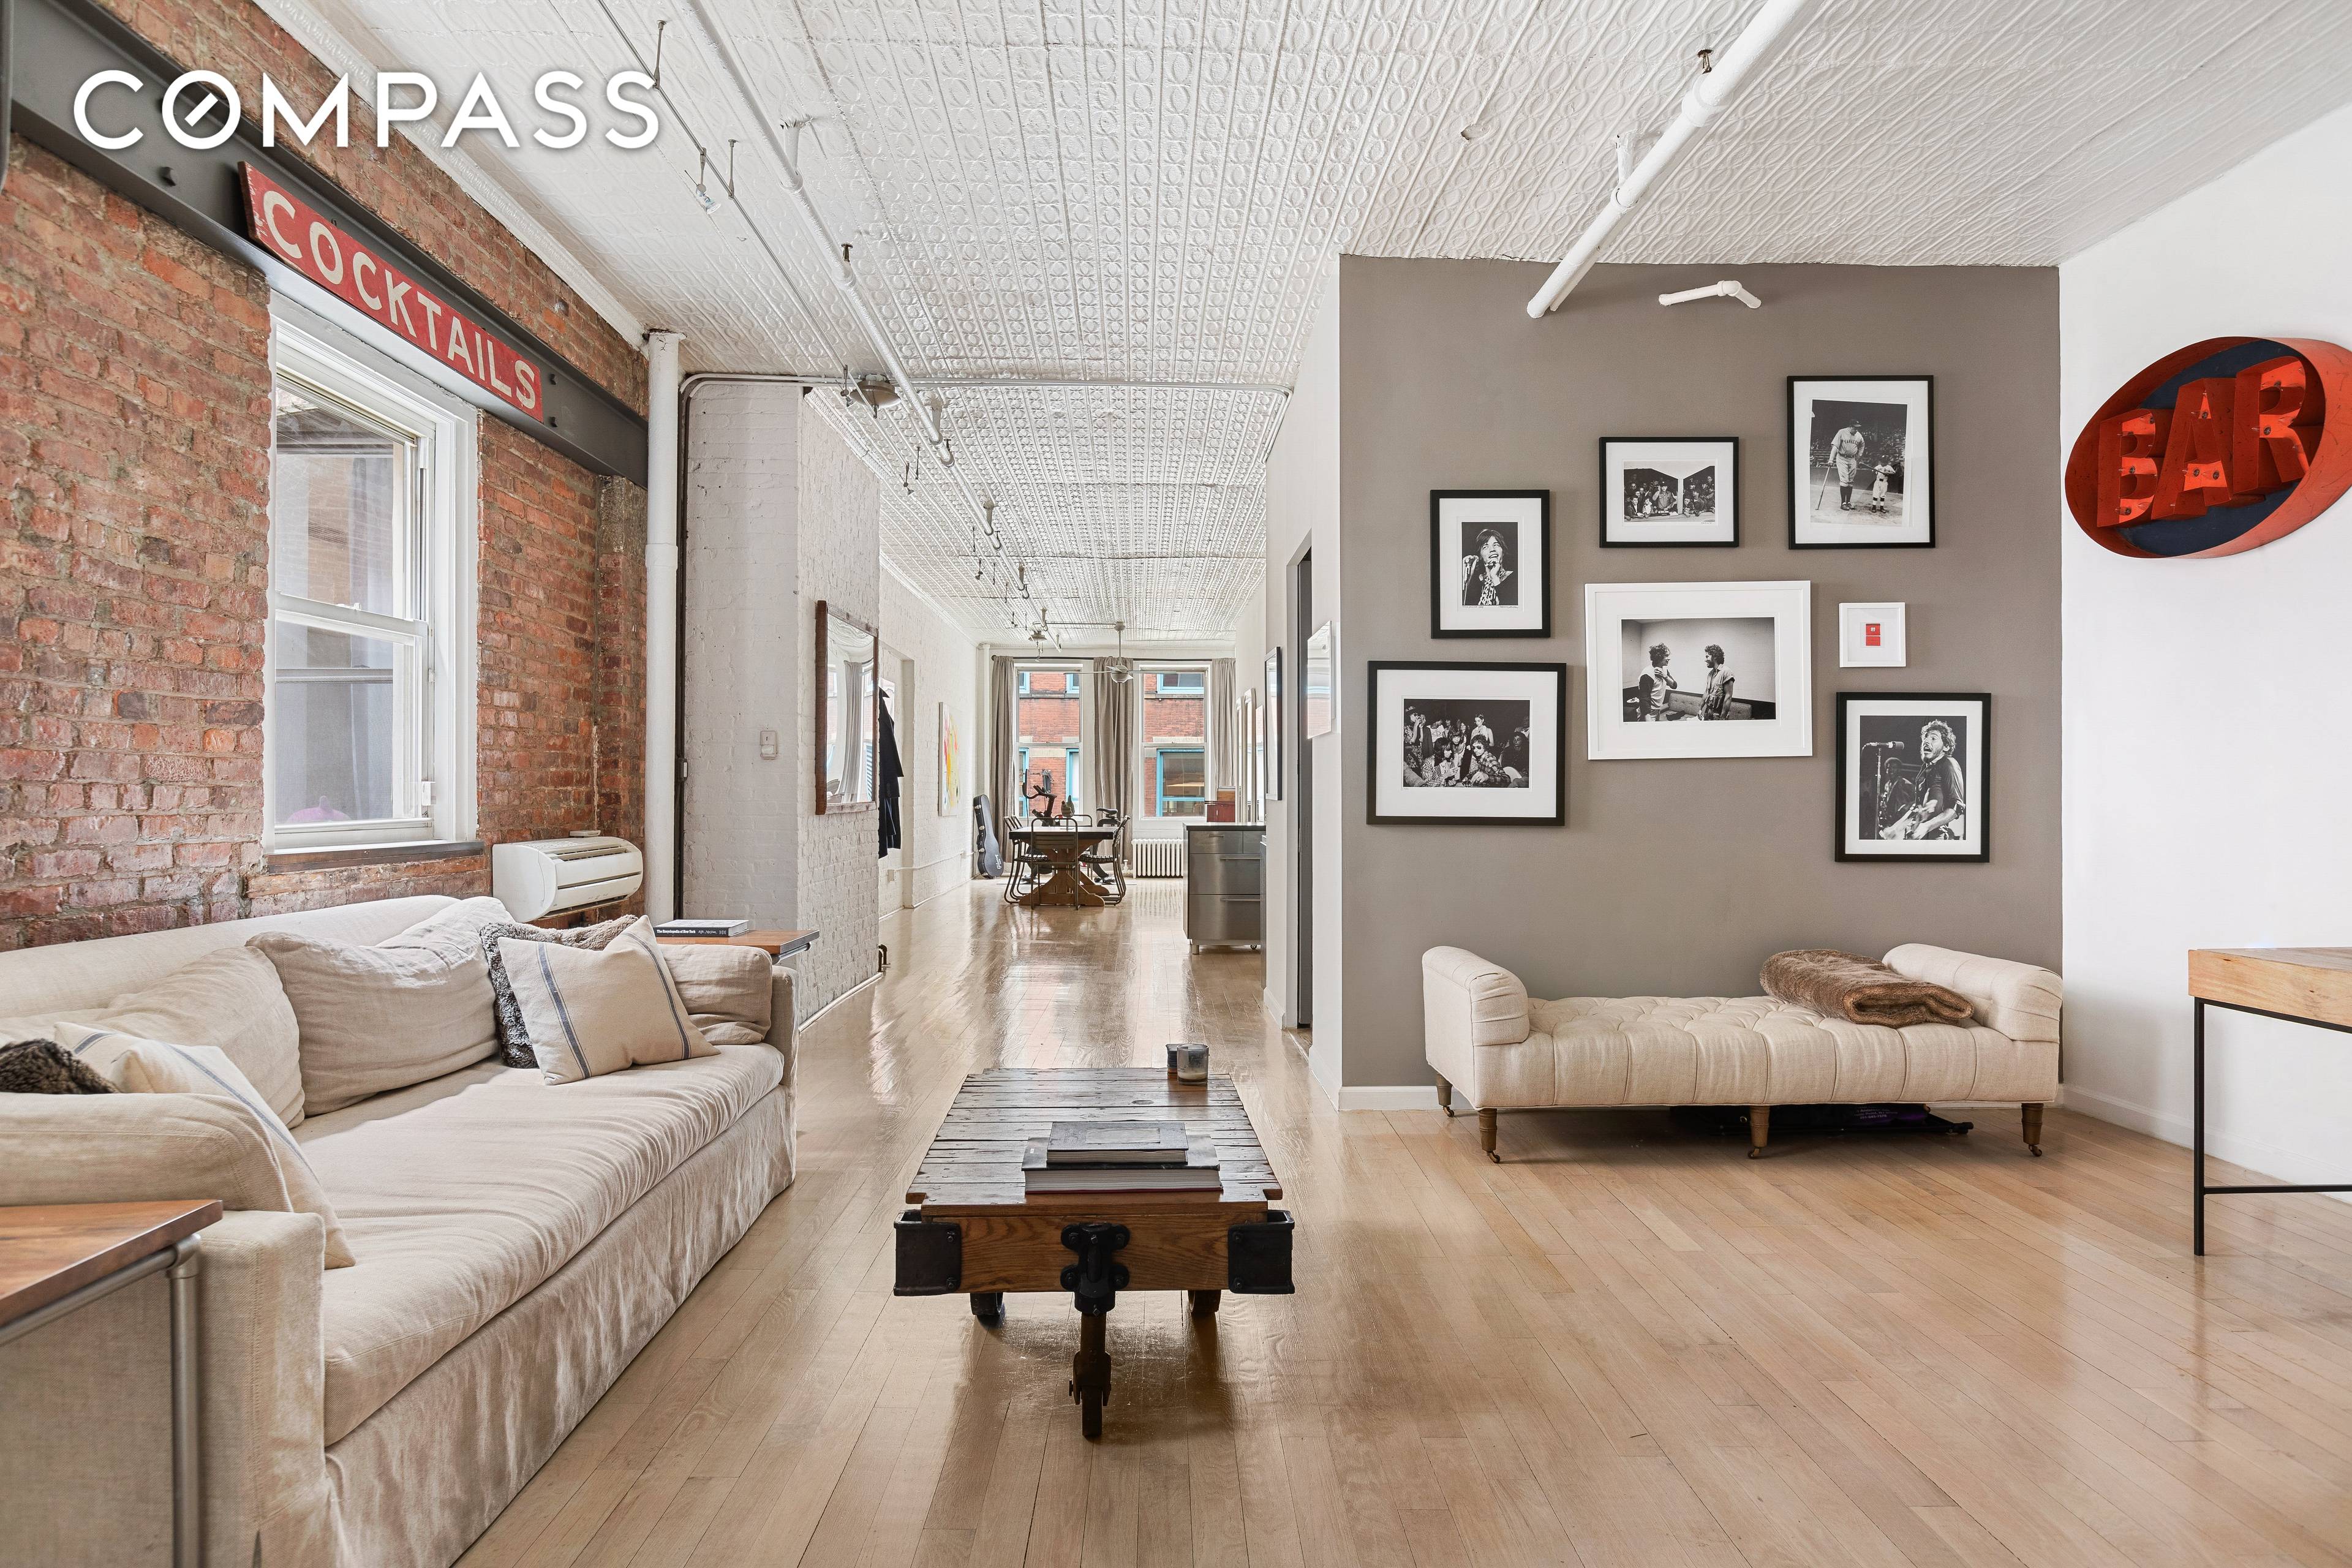 This architecturally stunning and expansive convertible two bedroom loft is located in the heart of Greenwich Village.